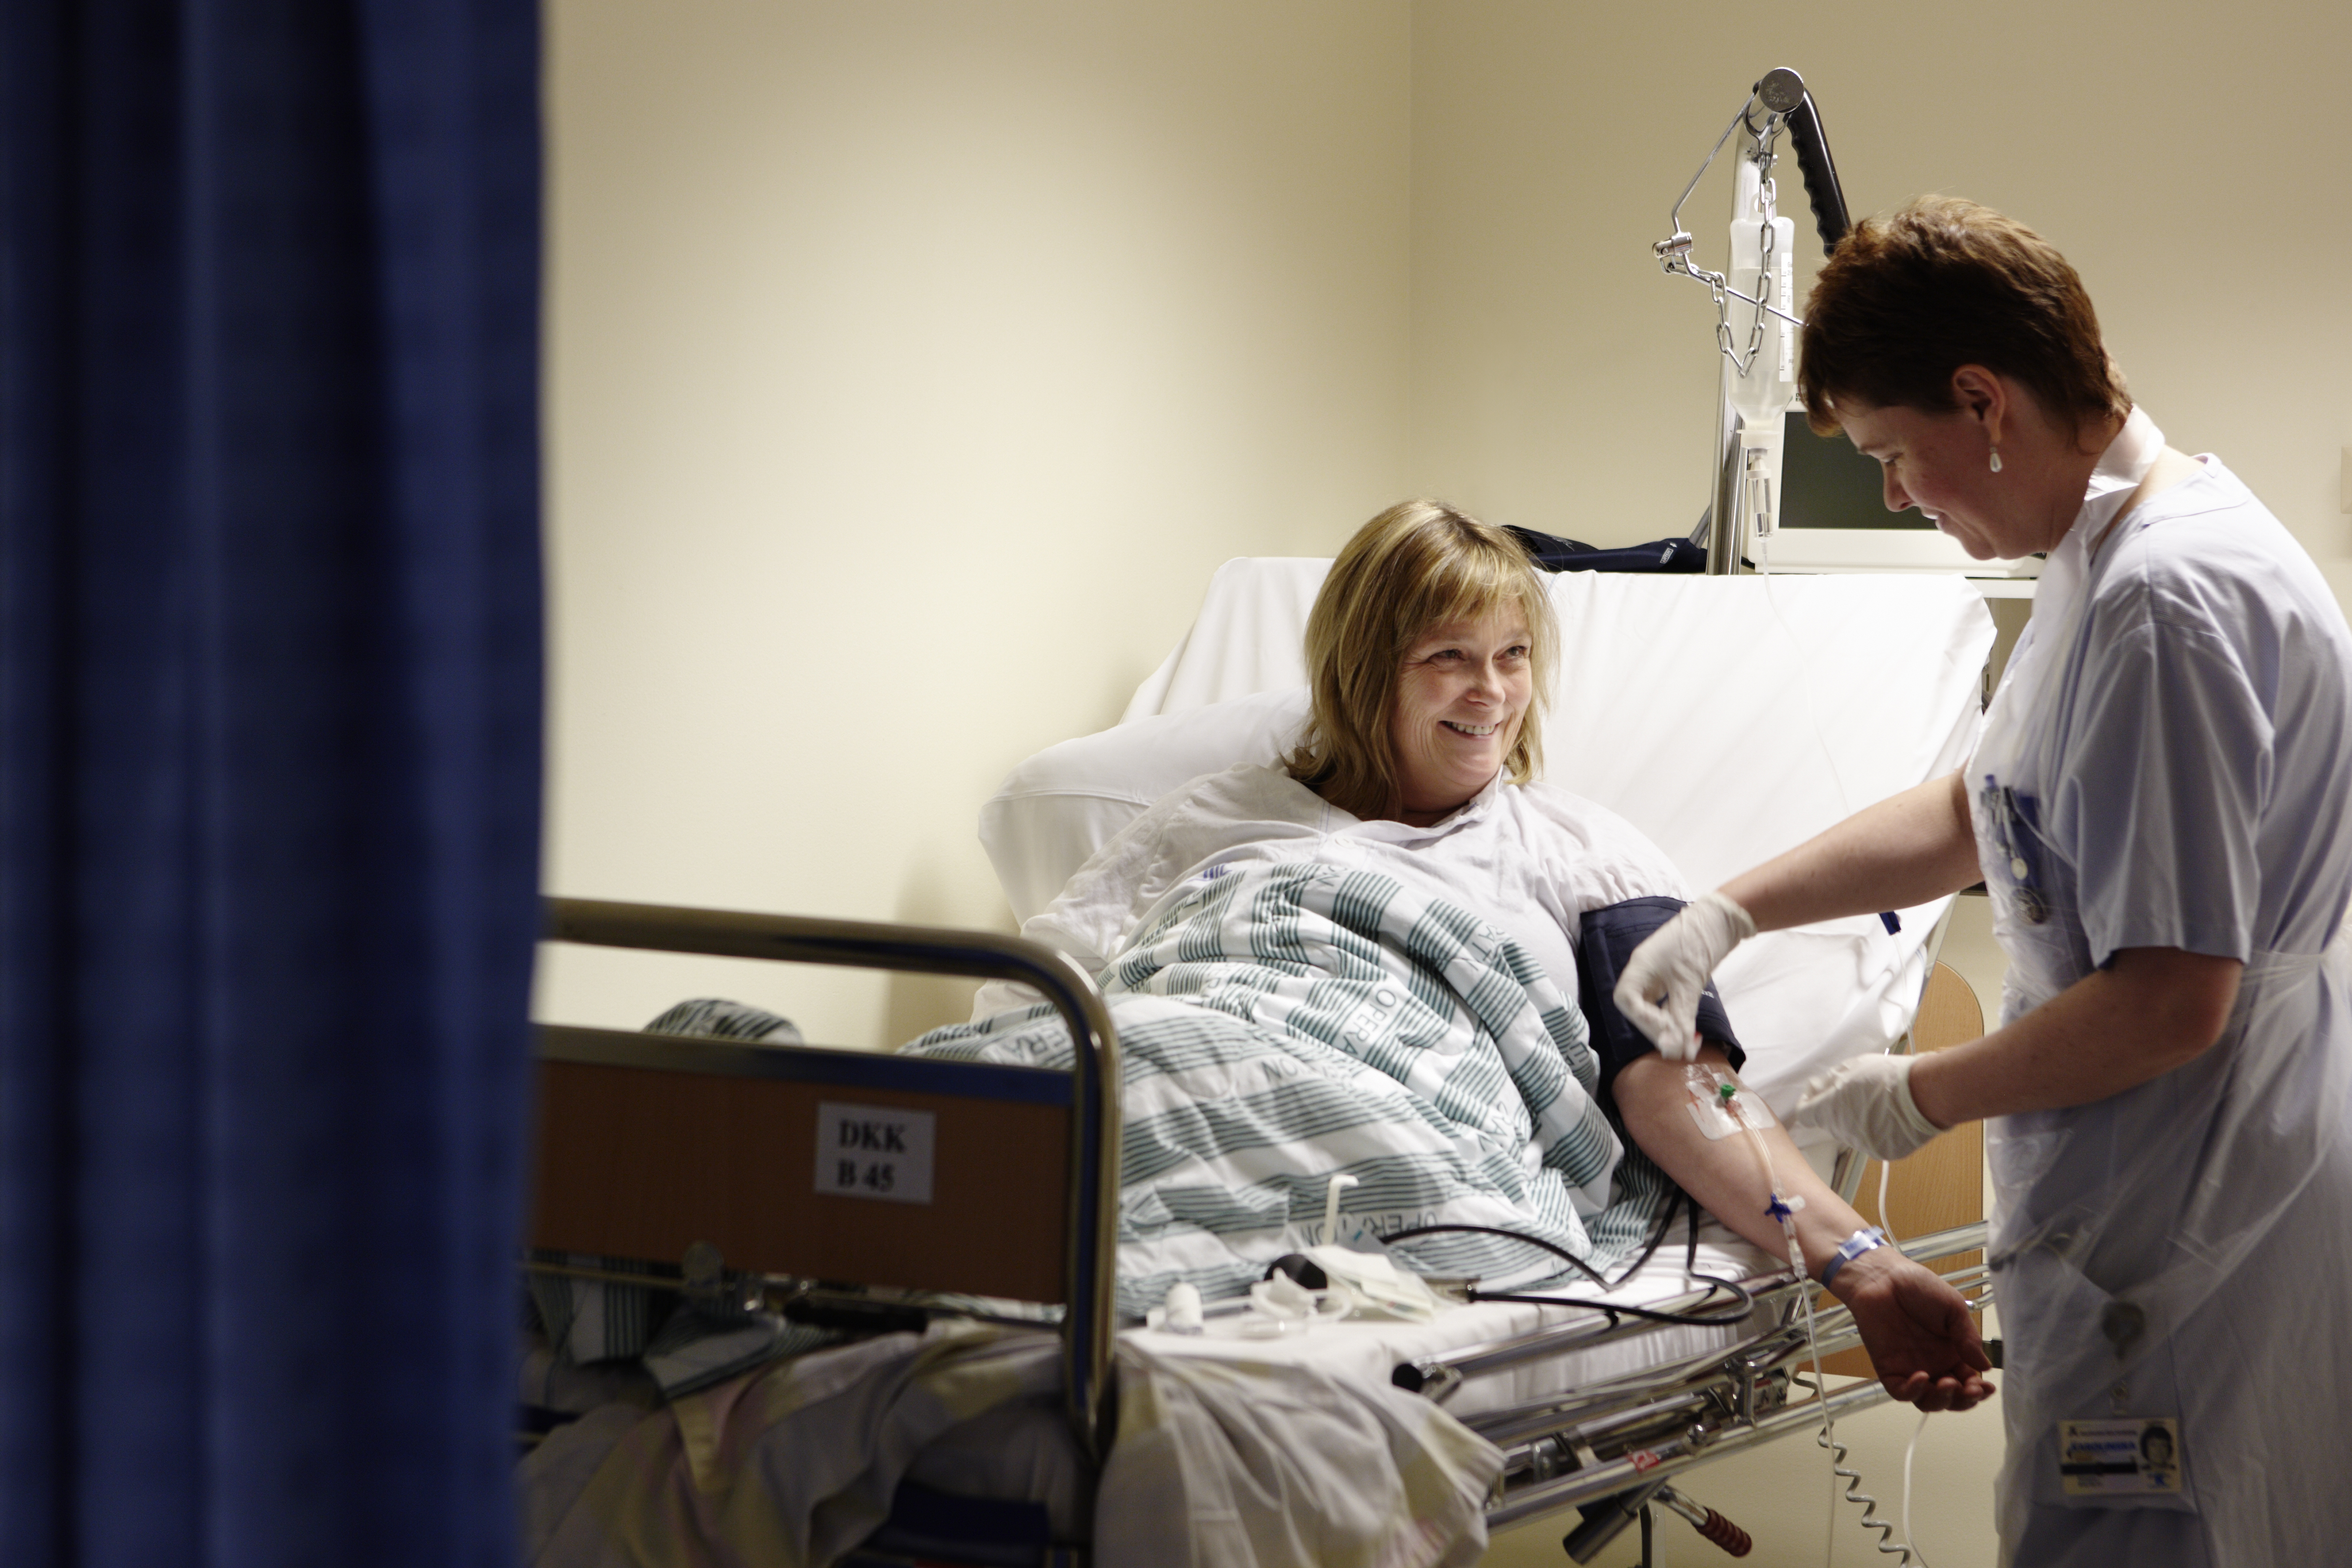 A patient, lying in a patient bed, and is being treated by health care professionals.